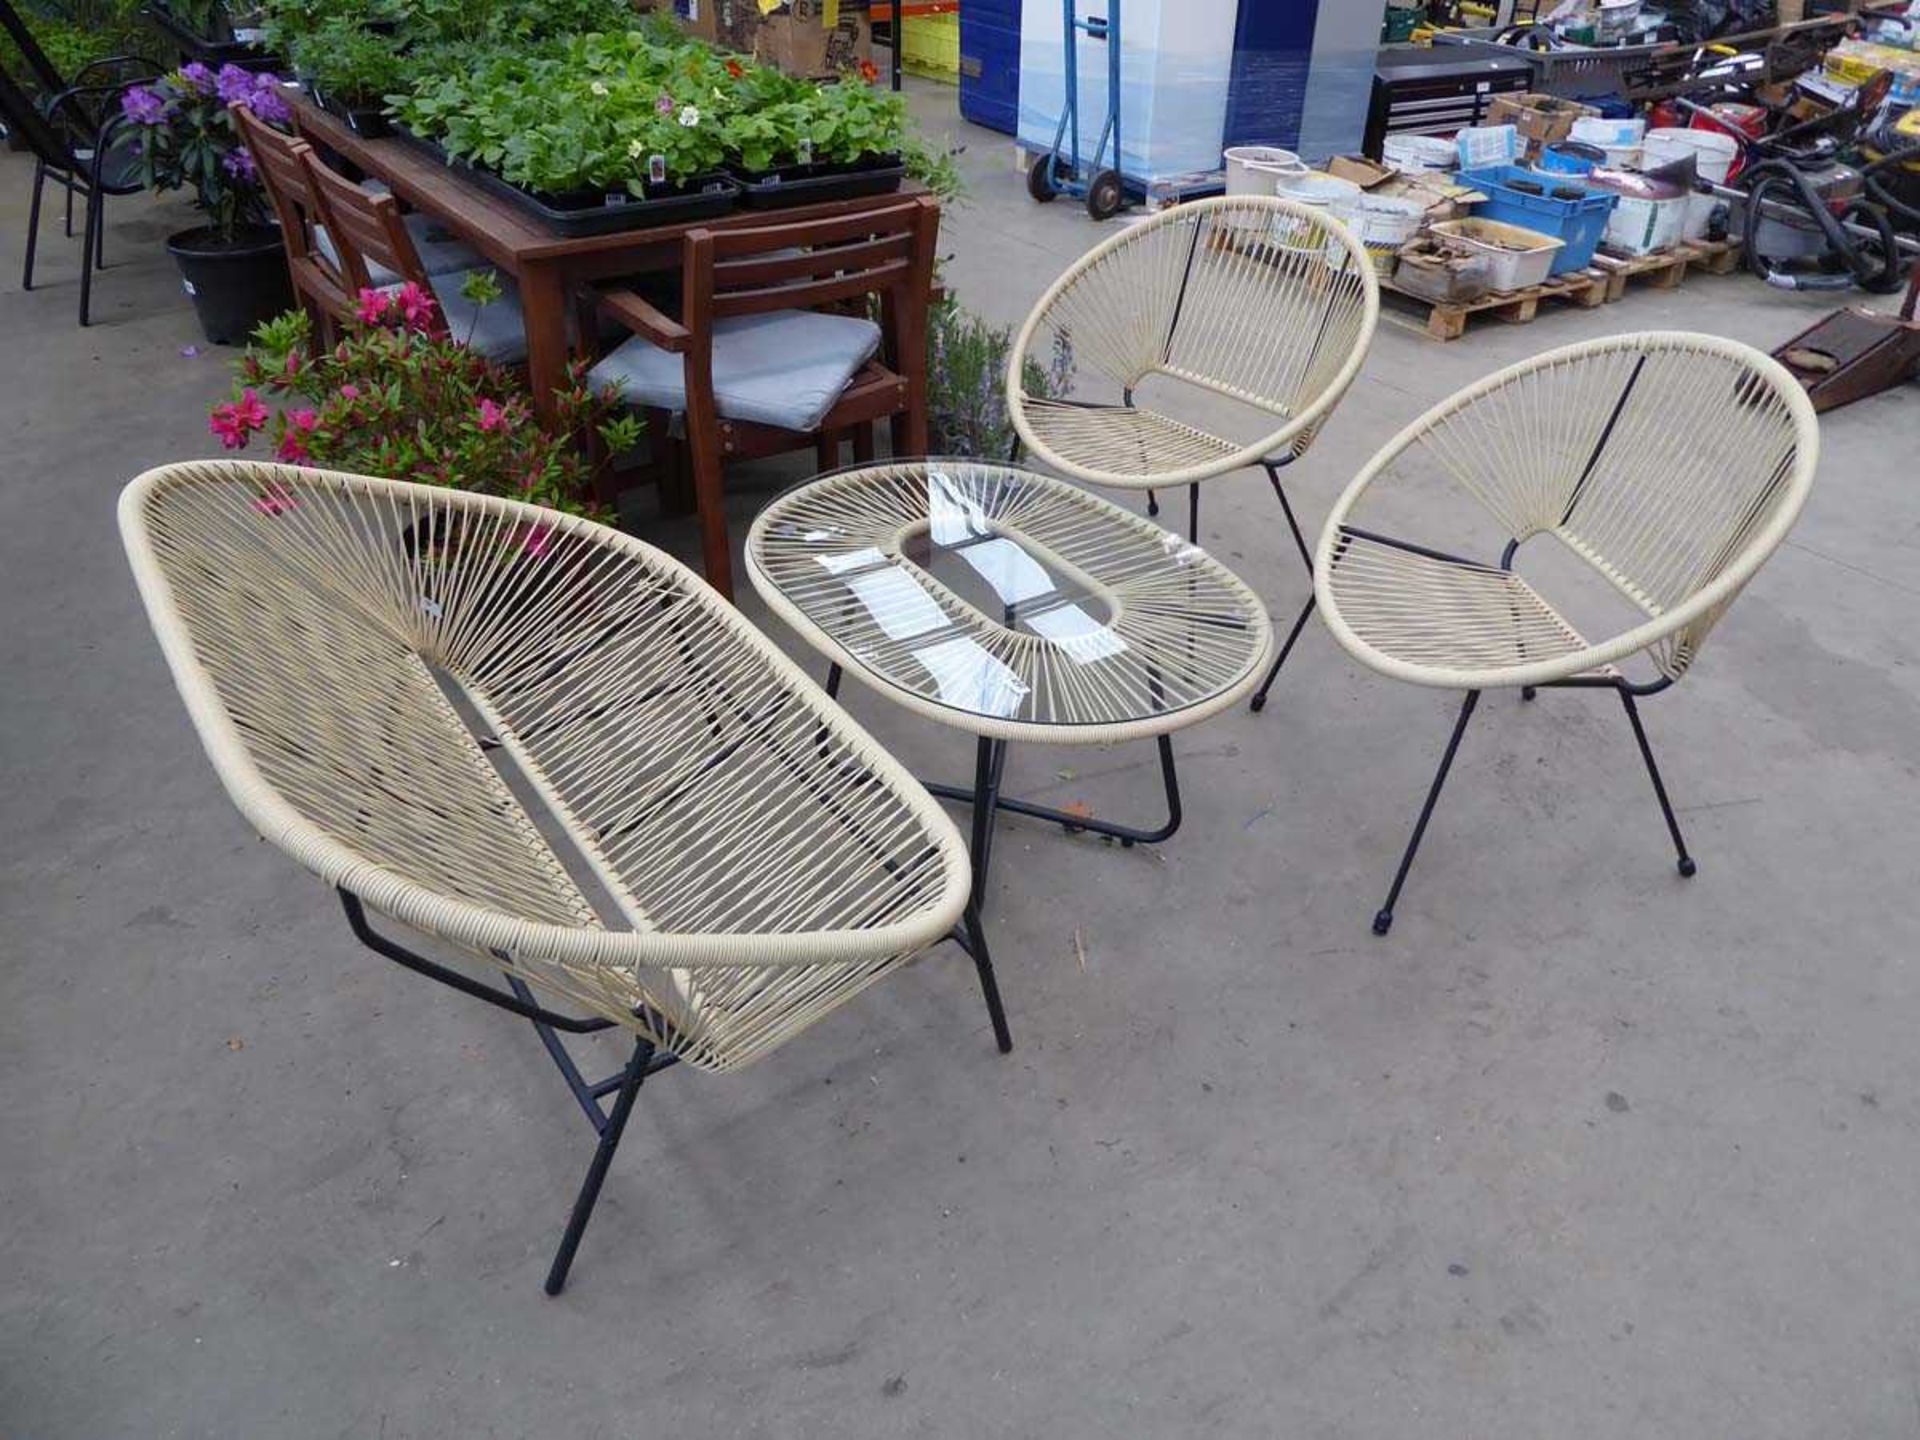 Four piece string garden set comprising two seater bench, two chairs and a glass topped coffee